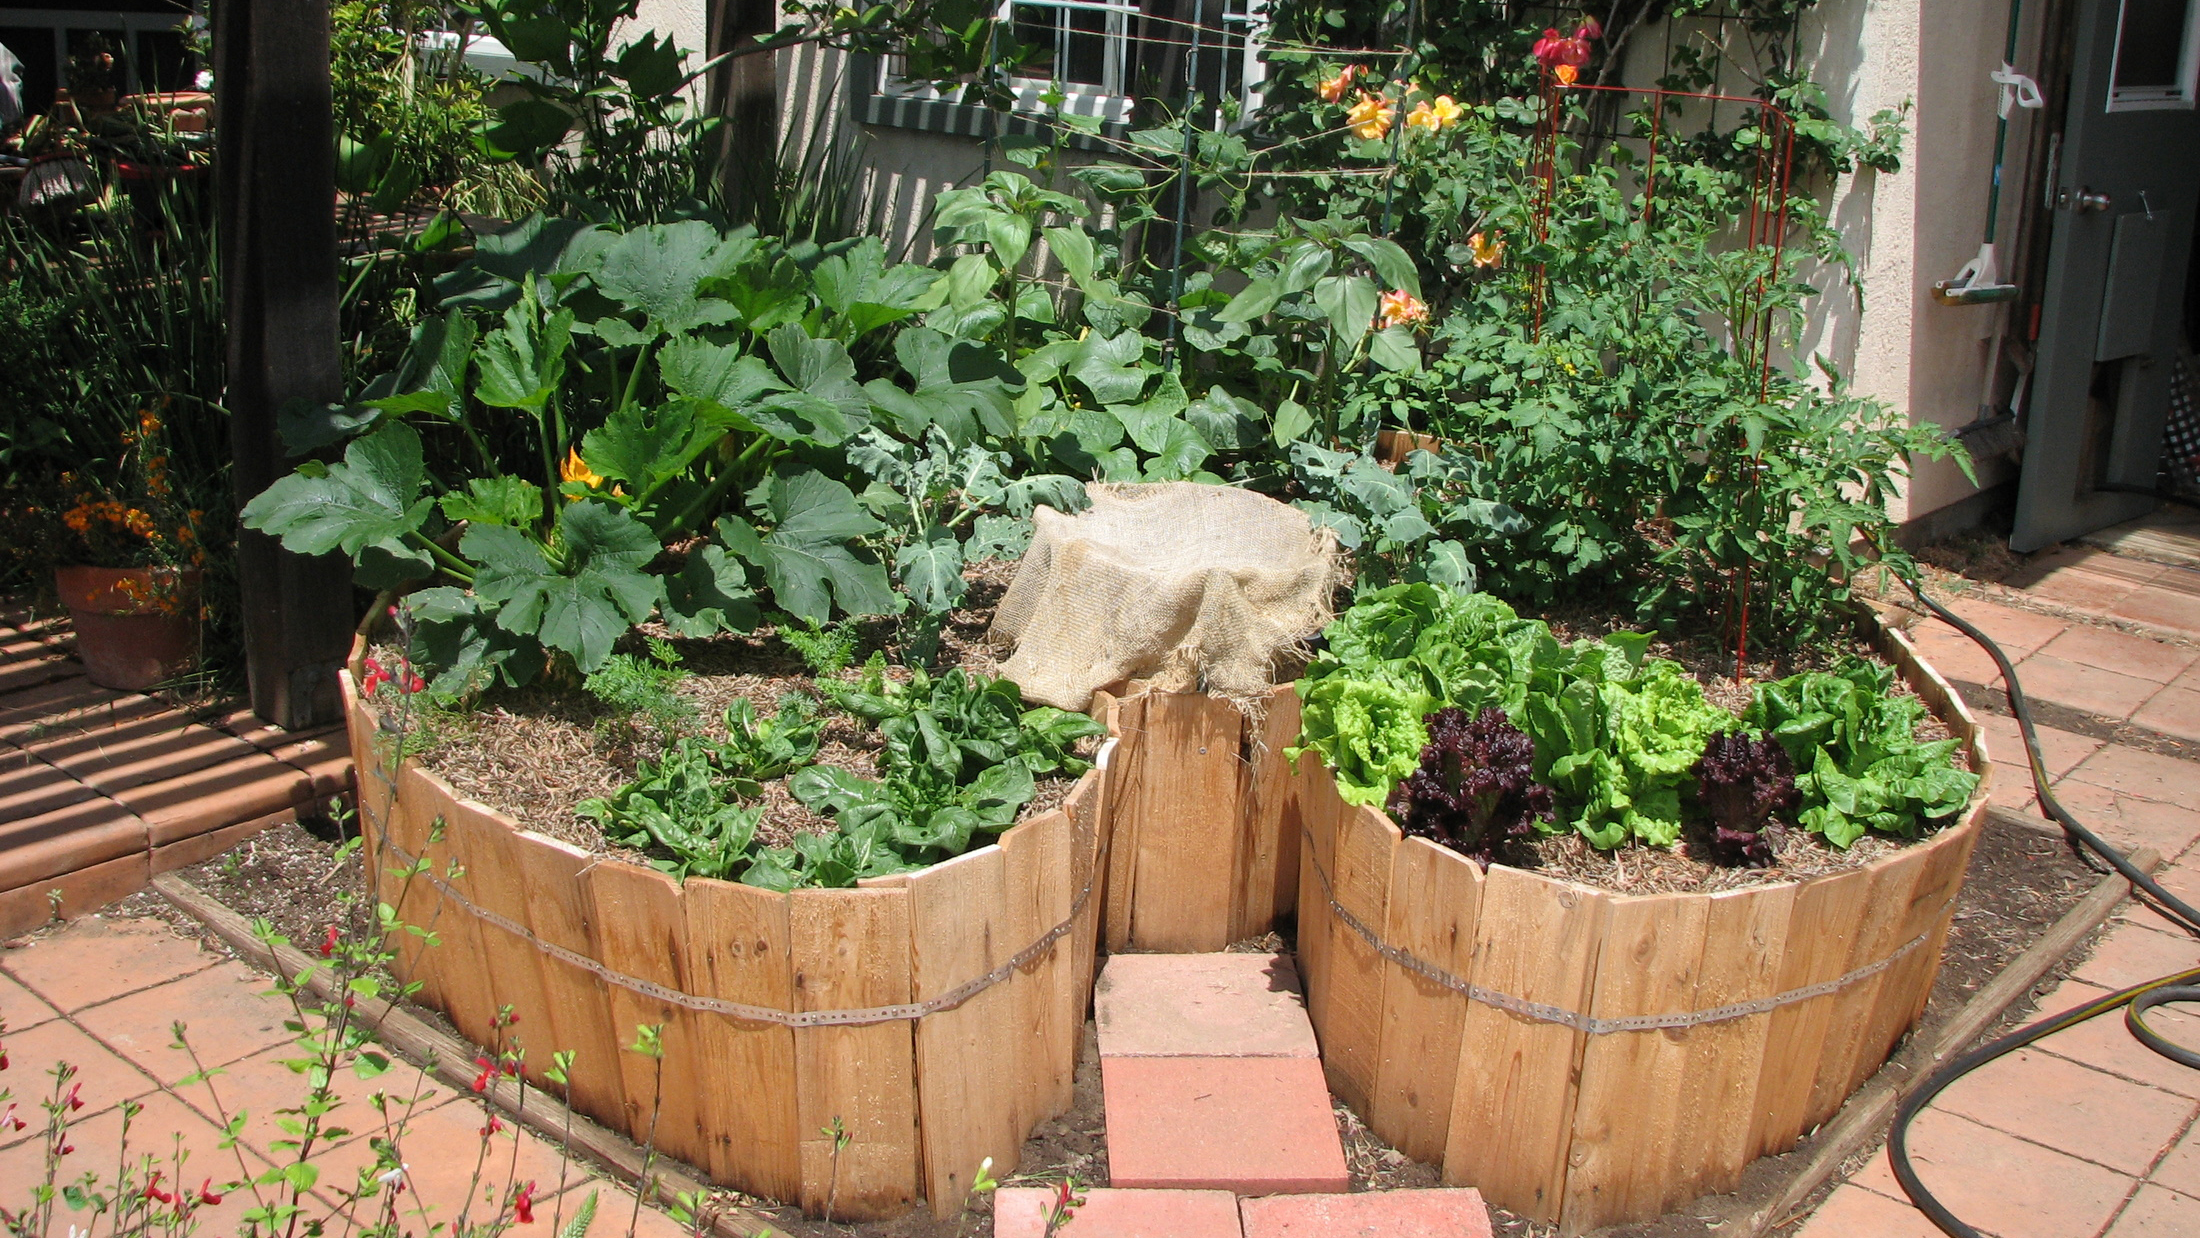 How to Build a Keyhole Garden easily and inexpensively | Sage's Acre